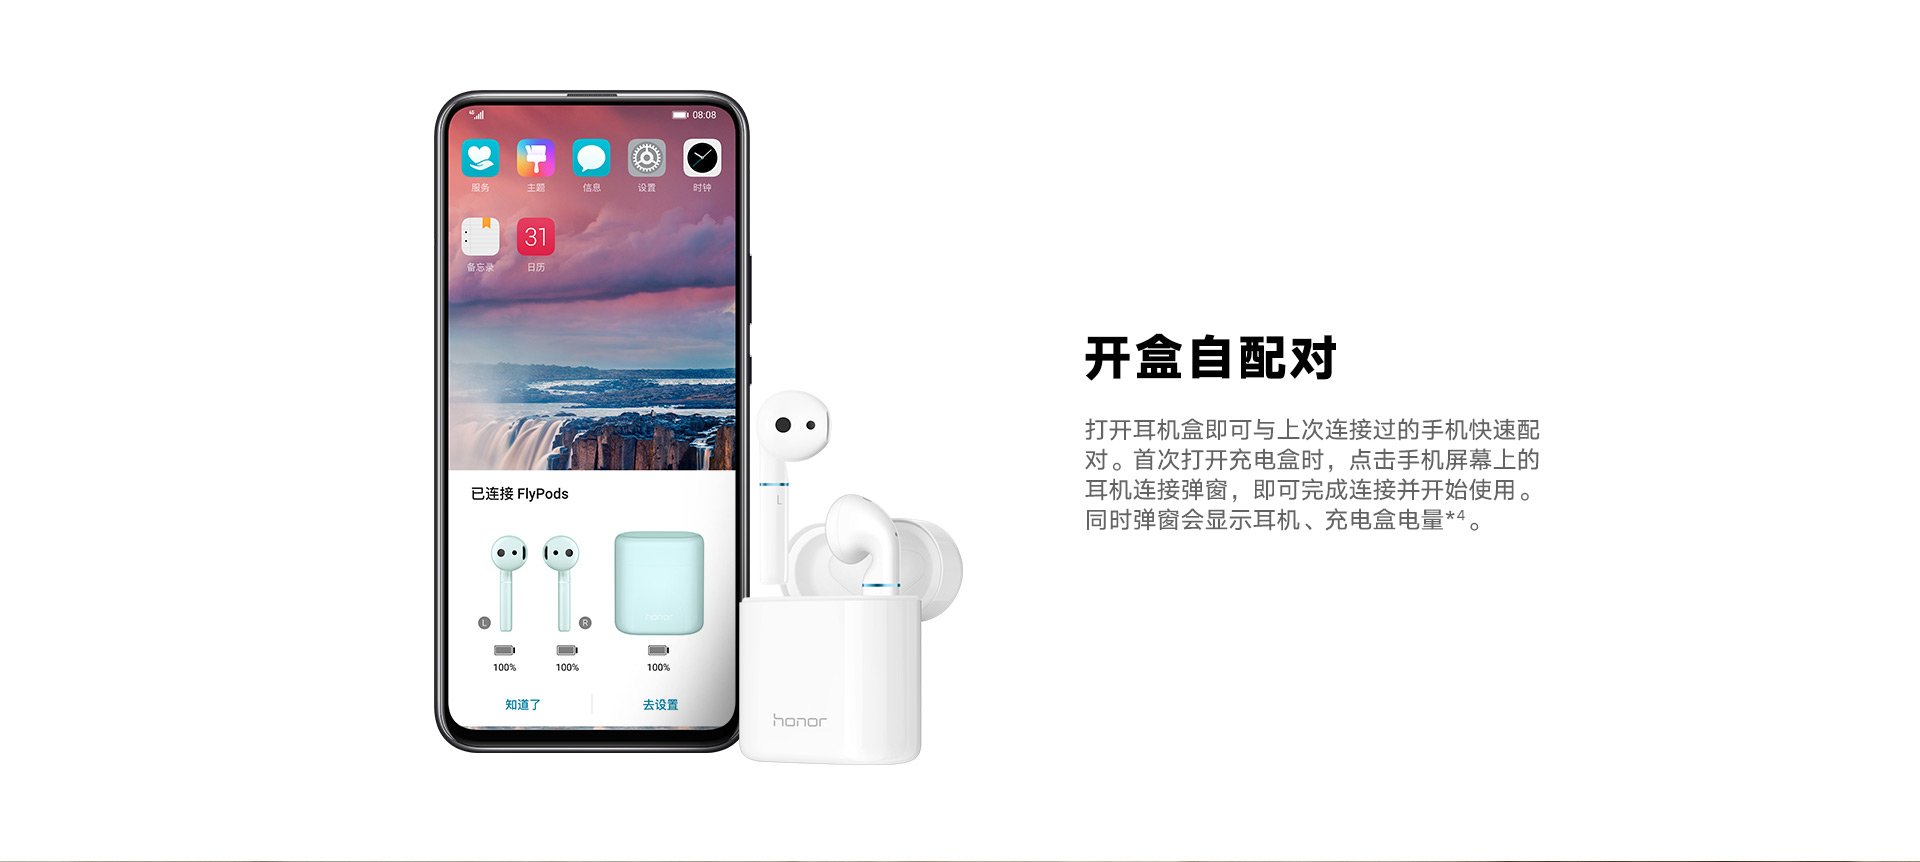 FlyPods Connection